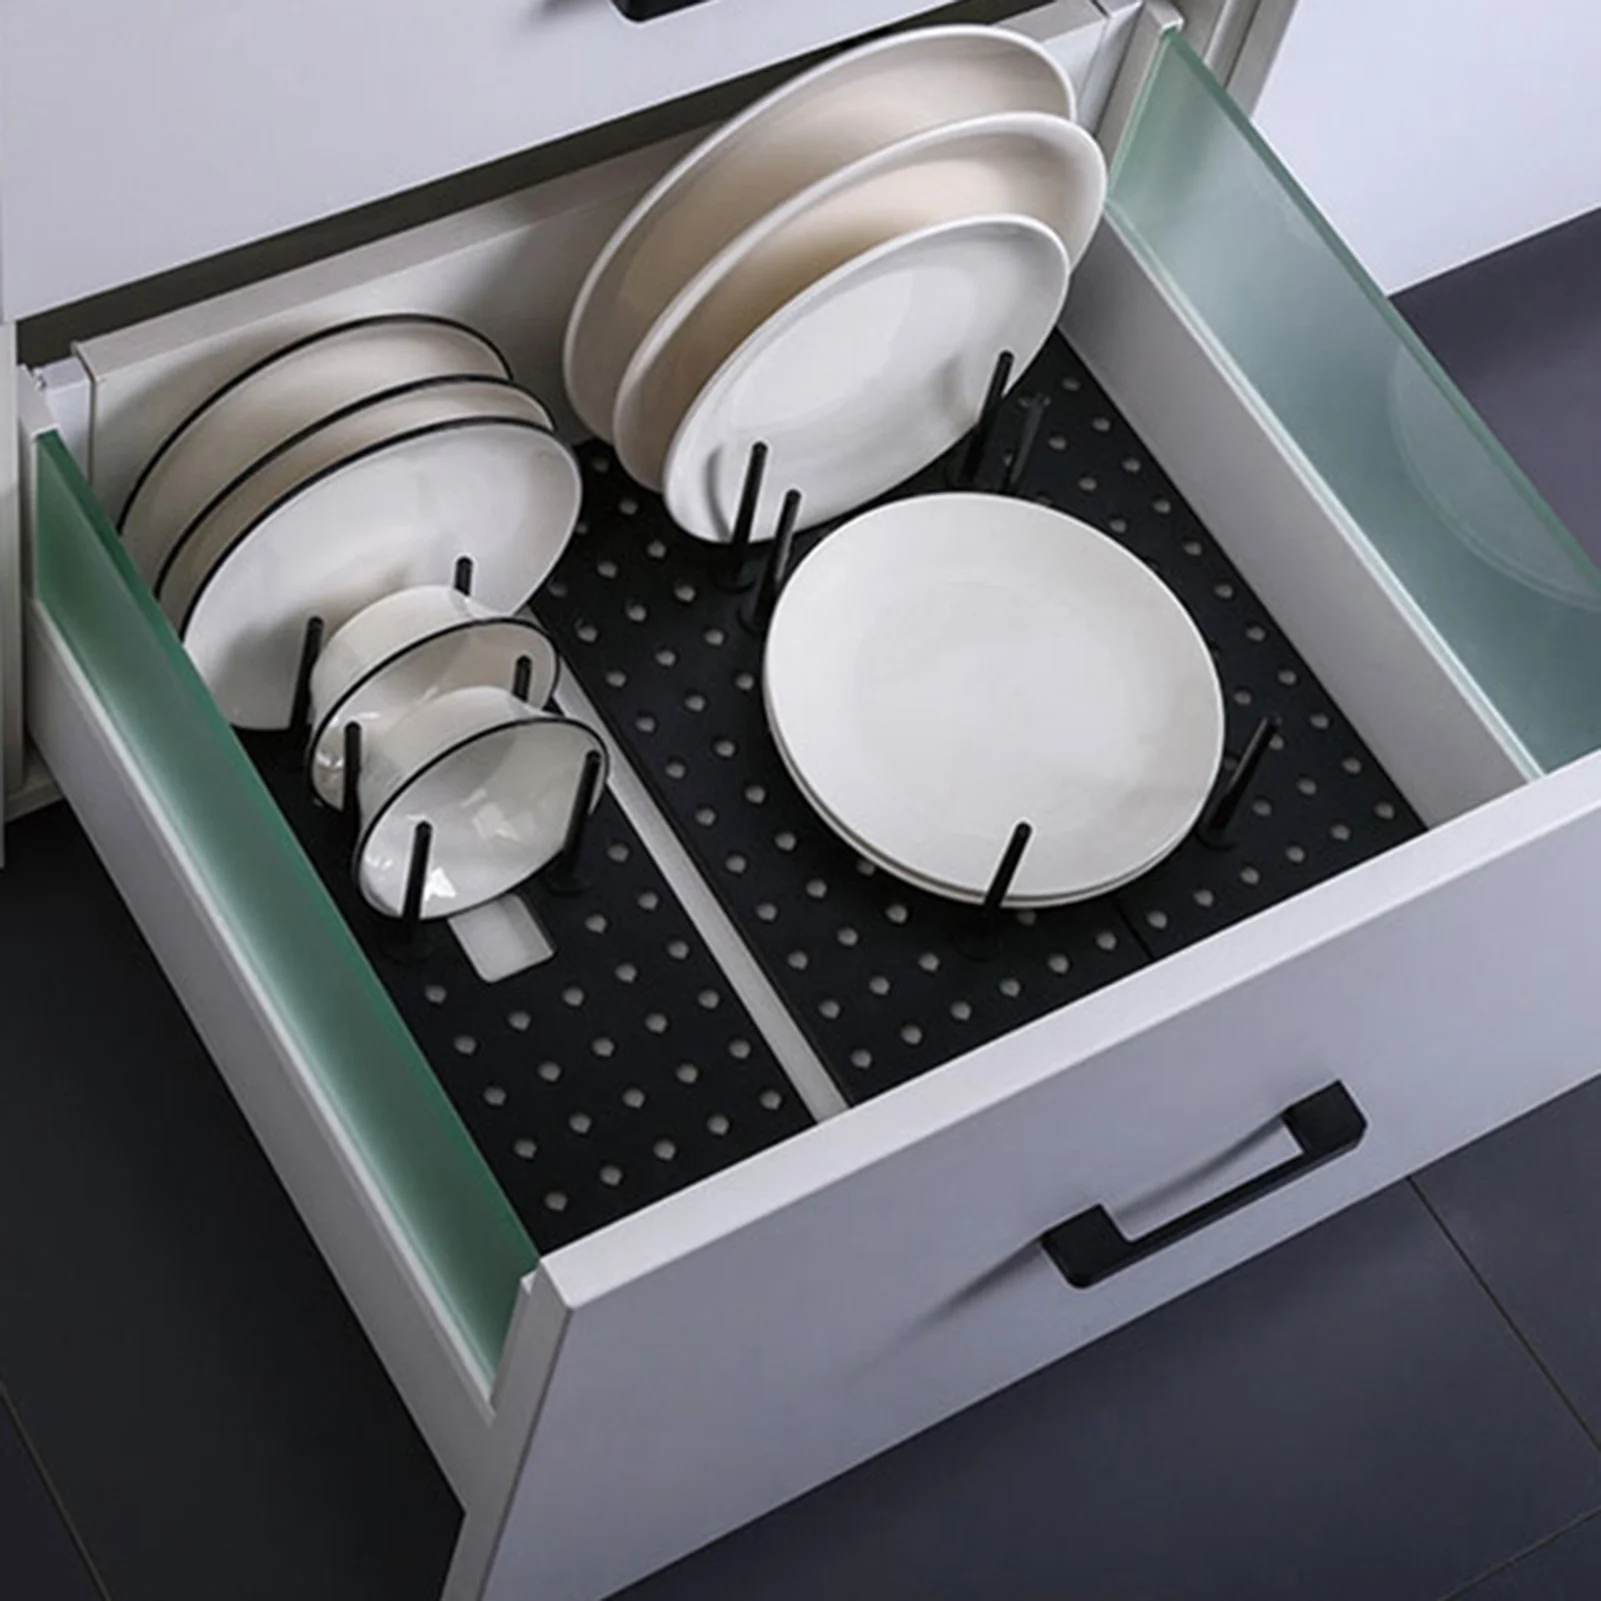 https://ae01.alicdn.com/kf/Ha2b1a09dfd784254b658d280ef77dcf13/Dish-Plate-Storage-Holder-Drainer-Retractable-Adjustable-Drawer-type-Separated-Bowl-Pot-Lid-Dish-Cup-Storage.jpg